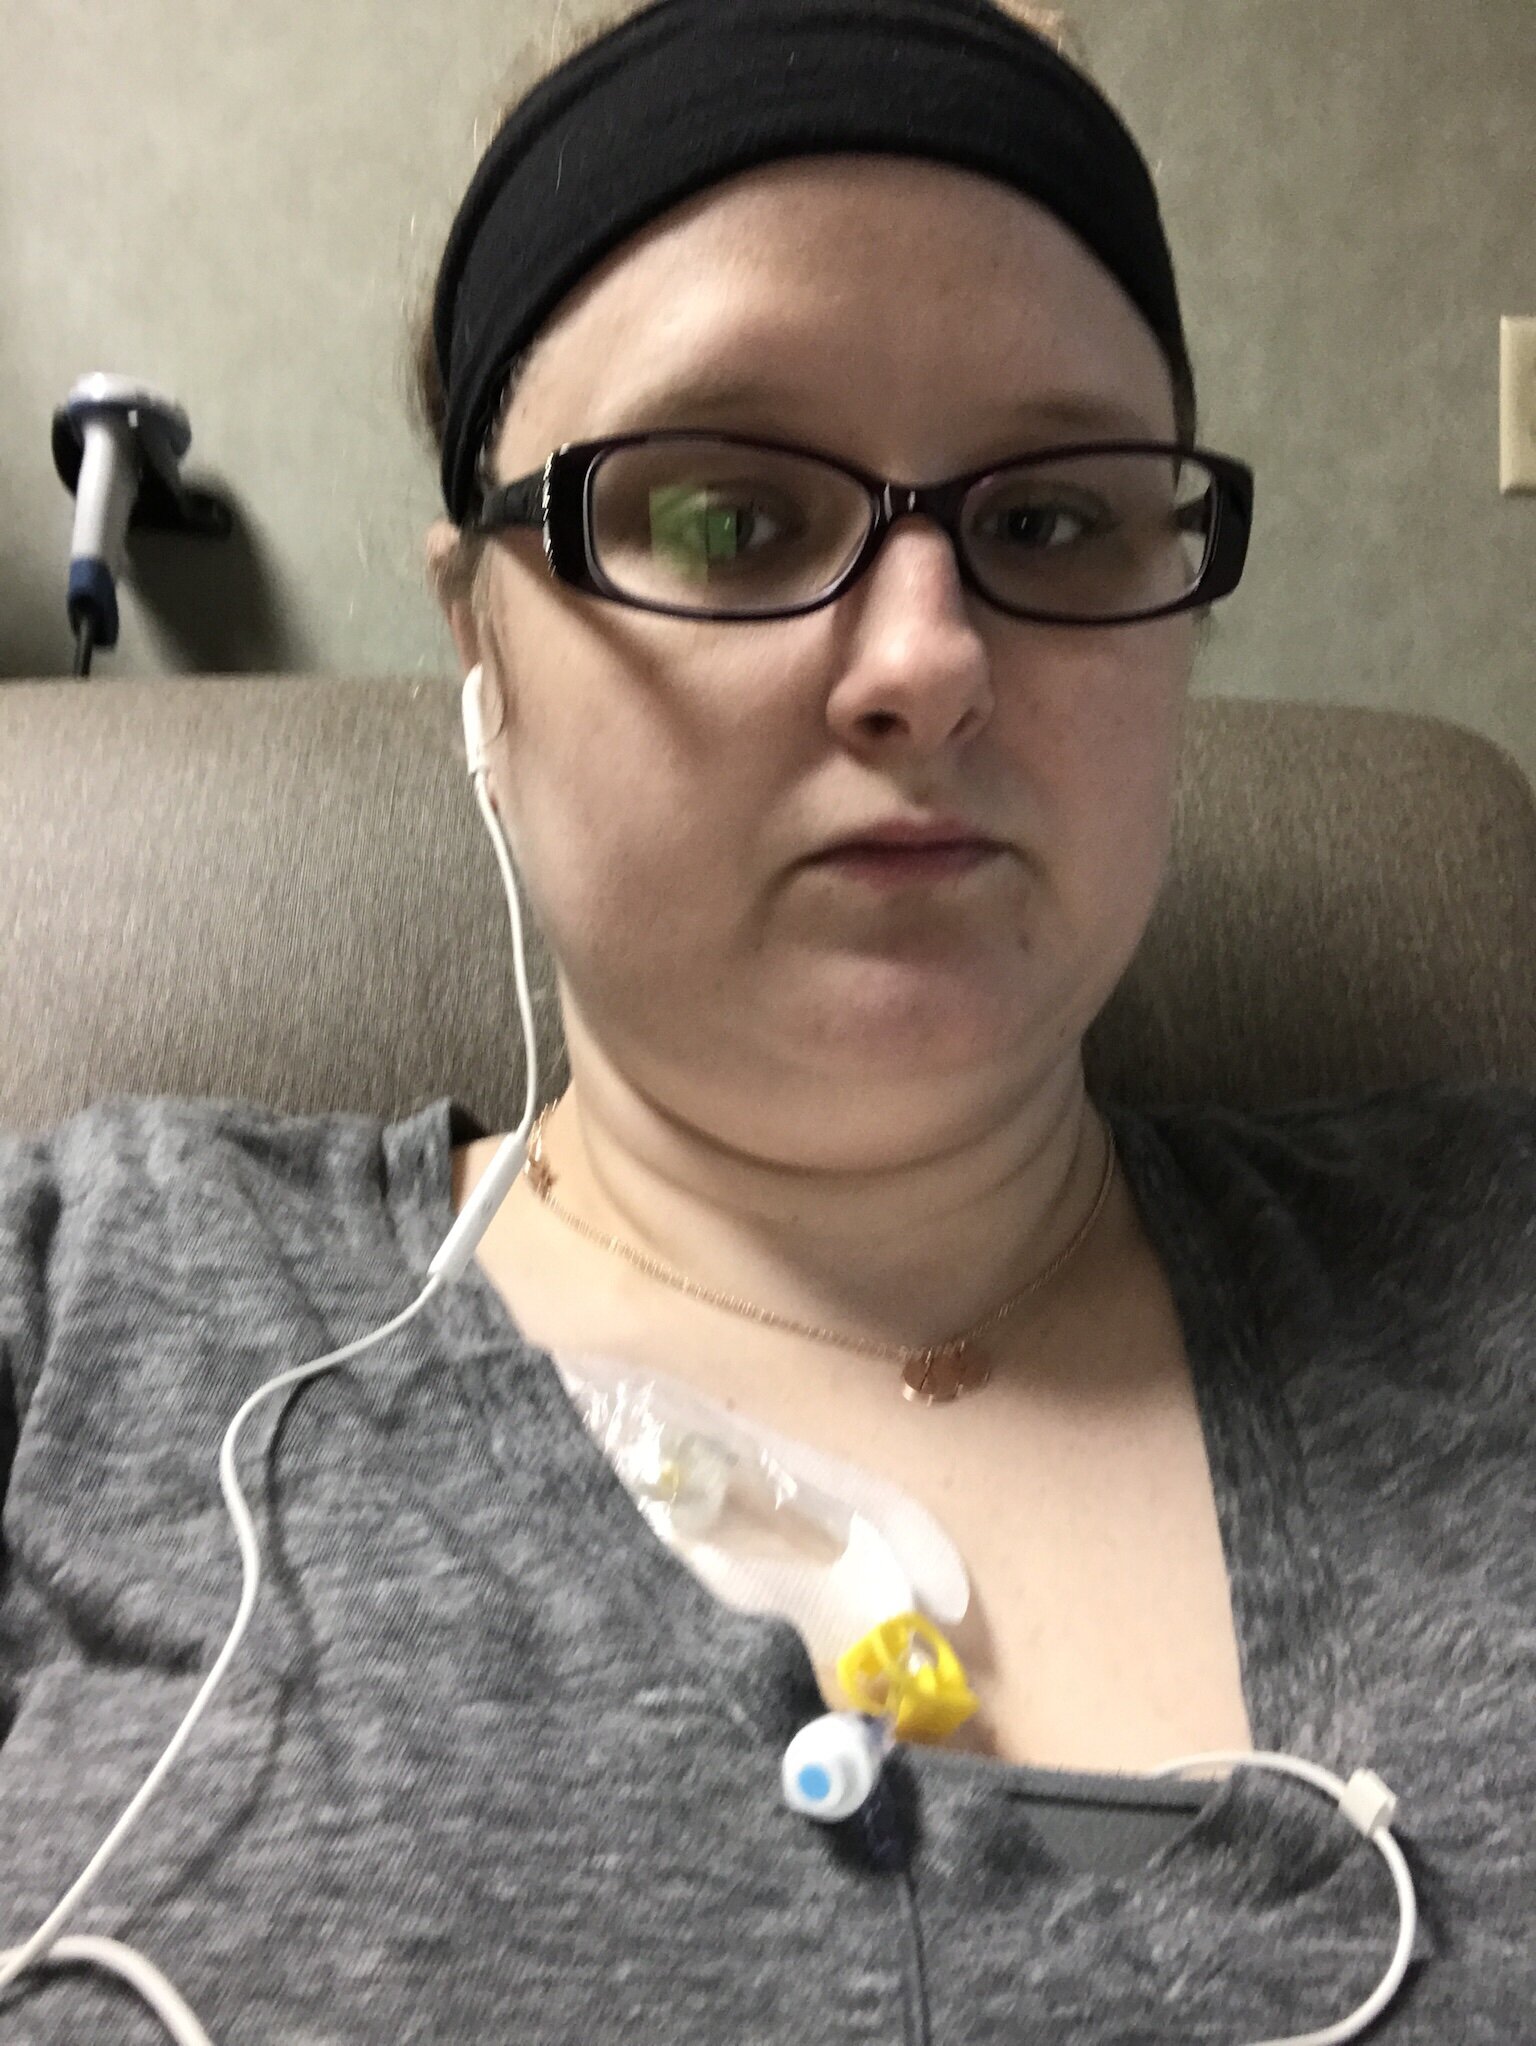  This was the day of my breakdown. I was trying so hard to keep it all together while I was getting my infusion. 